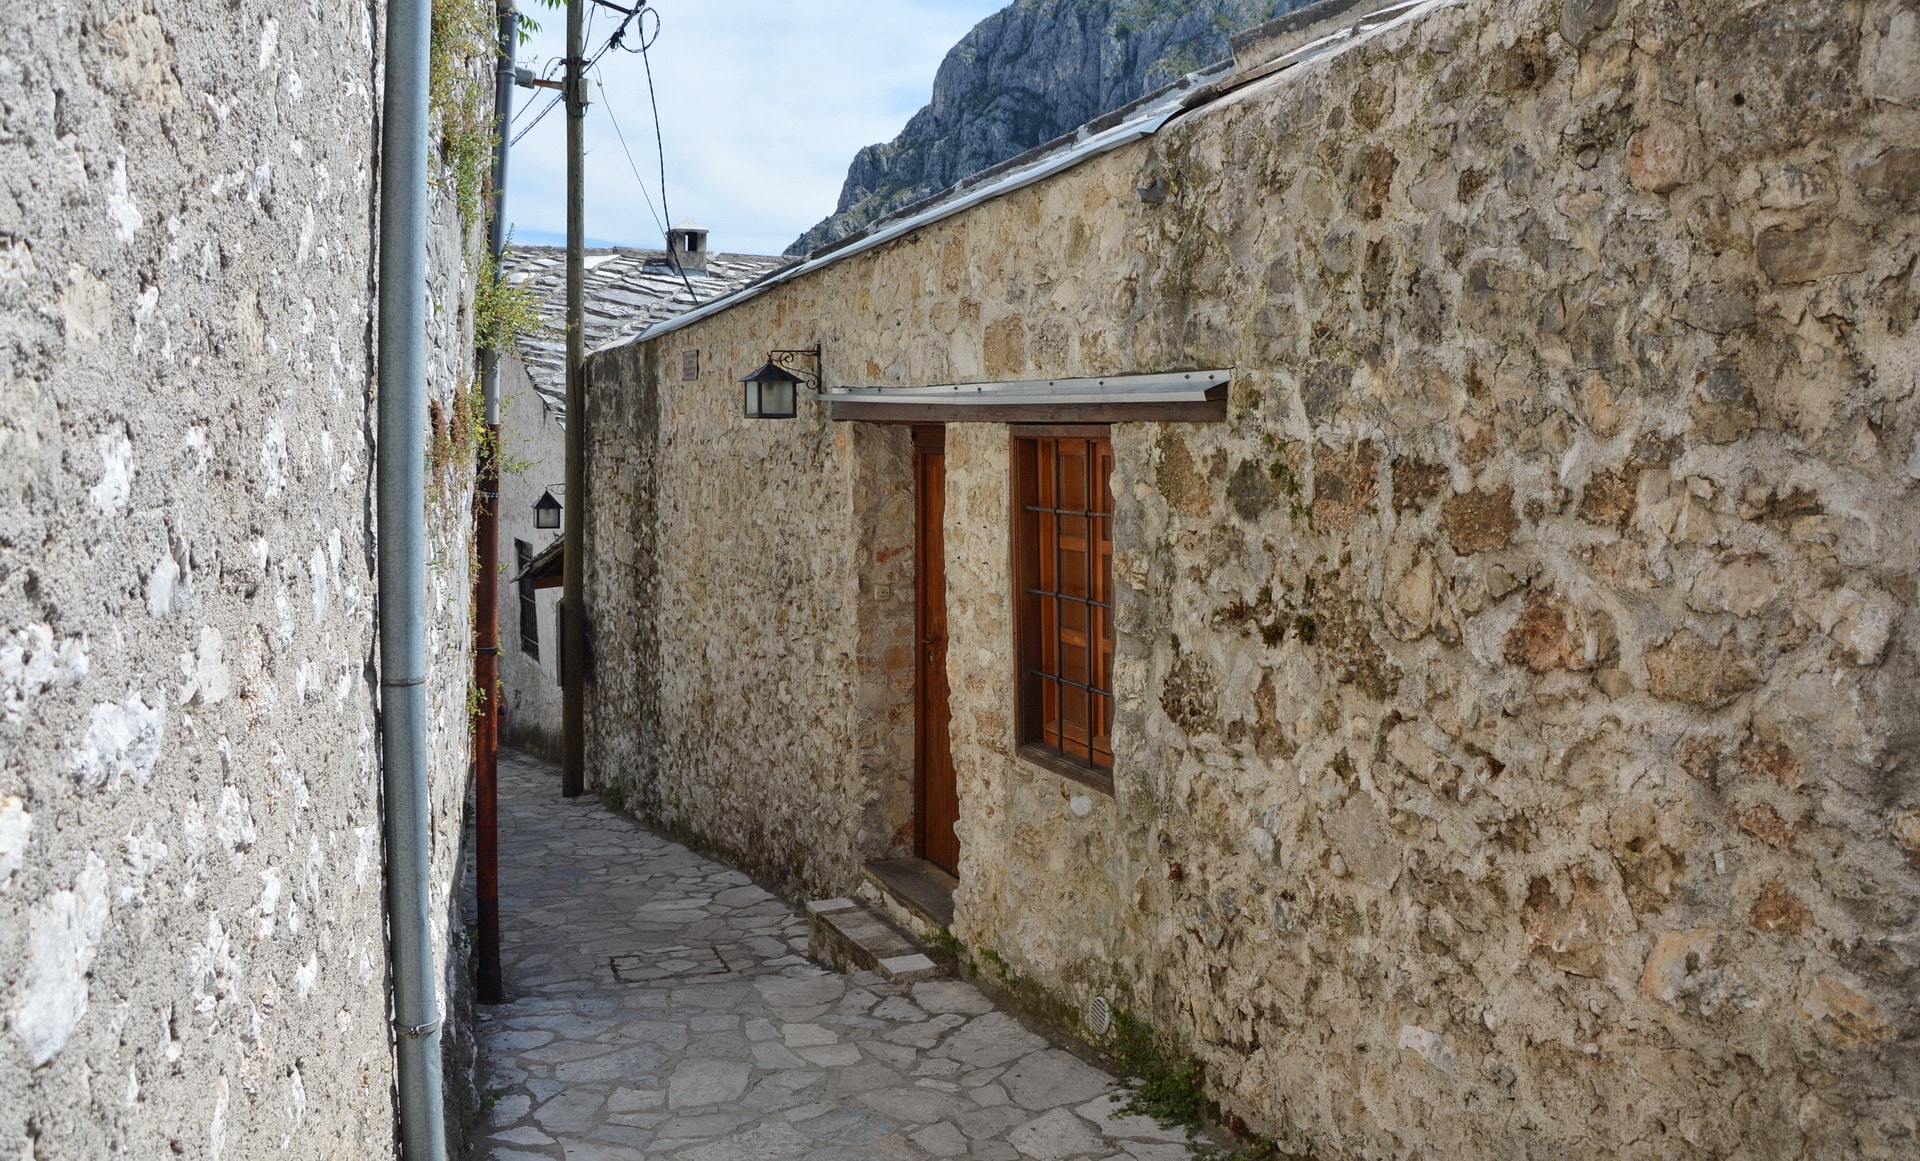 In the narrow streets of Mostar